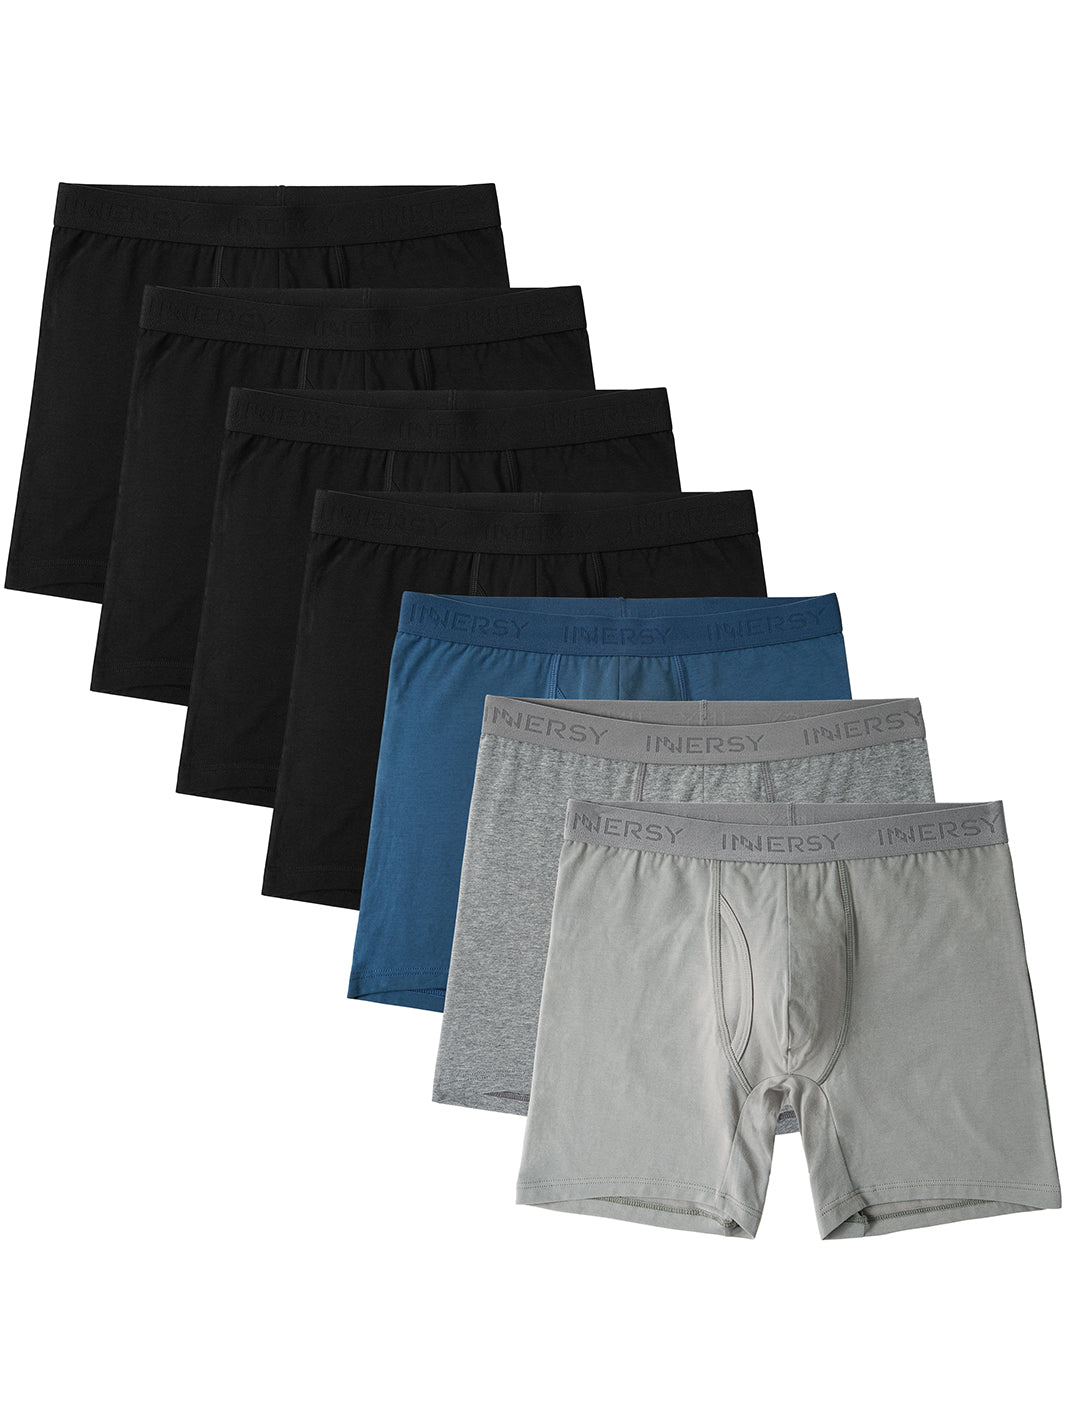 INNERSY Mens Boxer Briefs with Fly Cotton Stretchy Underwear 7 Pack (Black  With Colorful Waistband, Small) 